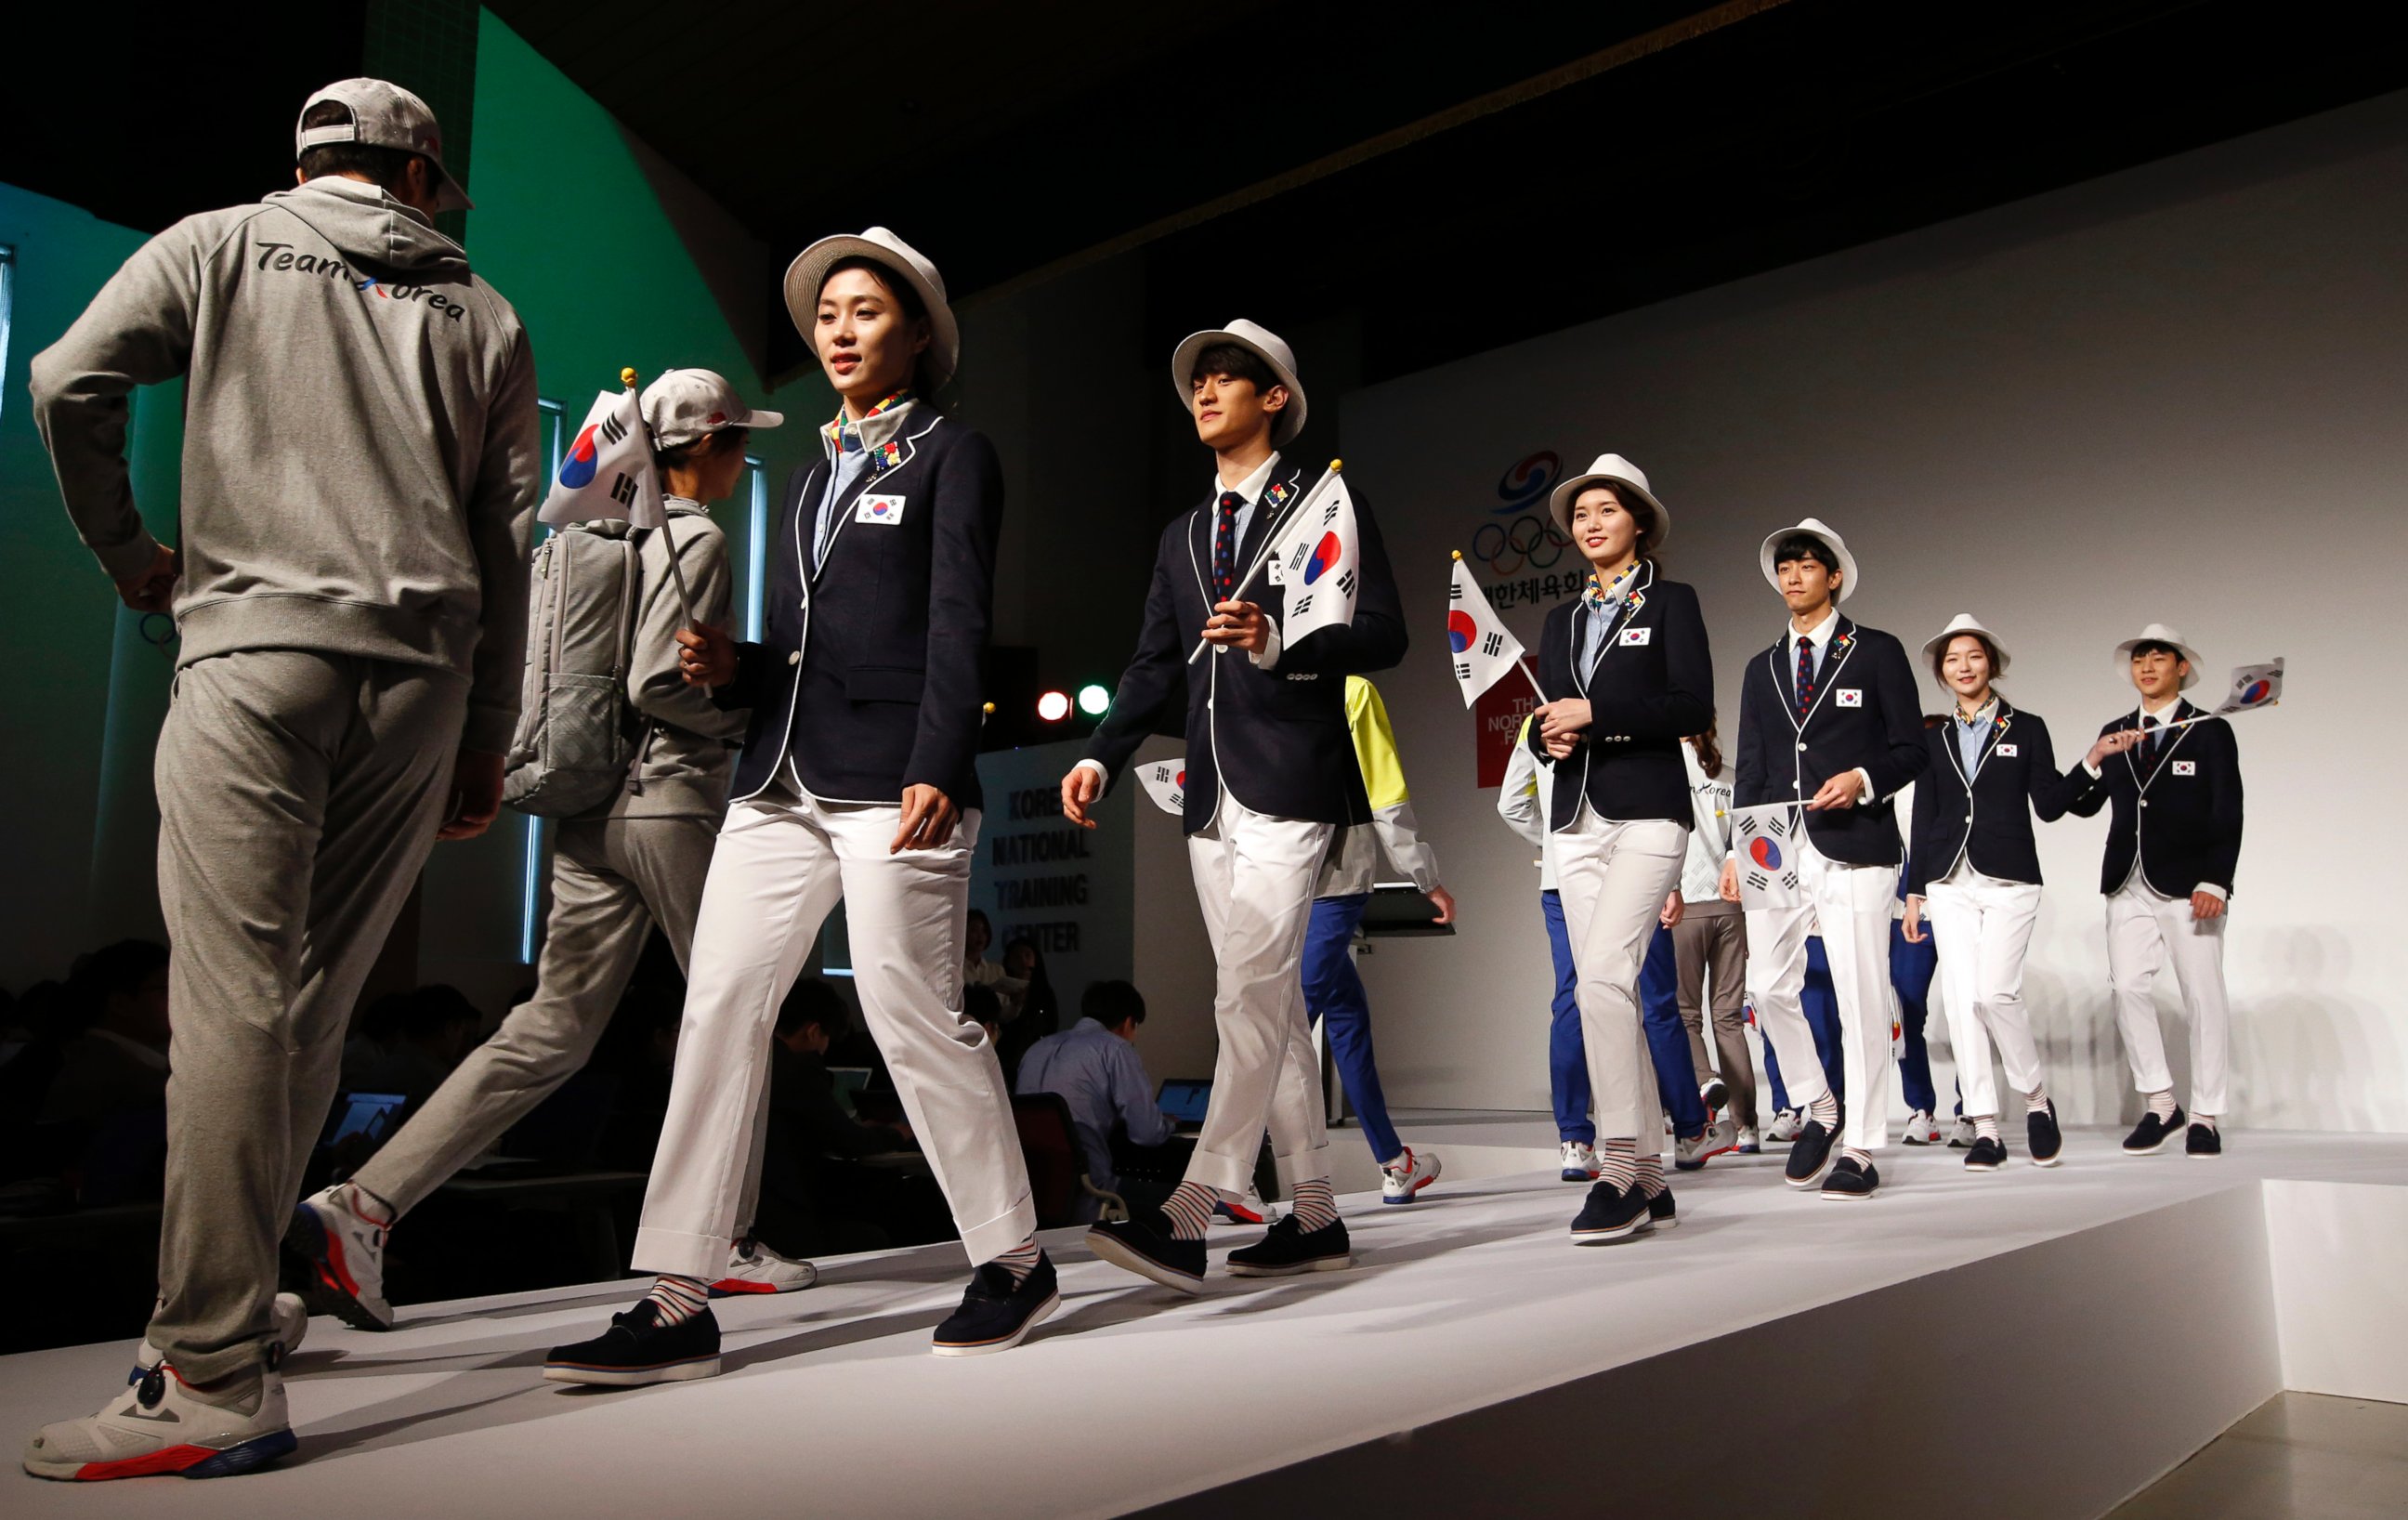 South Korean Olympic athletes and models present the South Korean Olympic team uniforms for the 2016 Rio de Janeiro Olympic Games at Korean National Training Center in Seoul on April 27, 2016. 